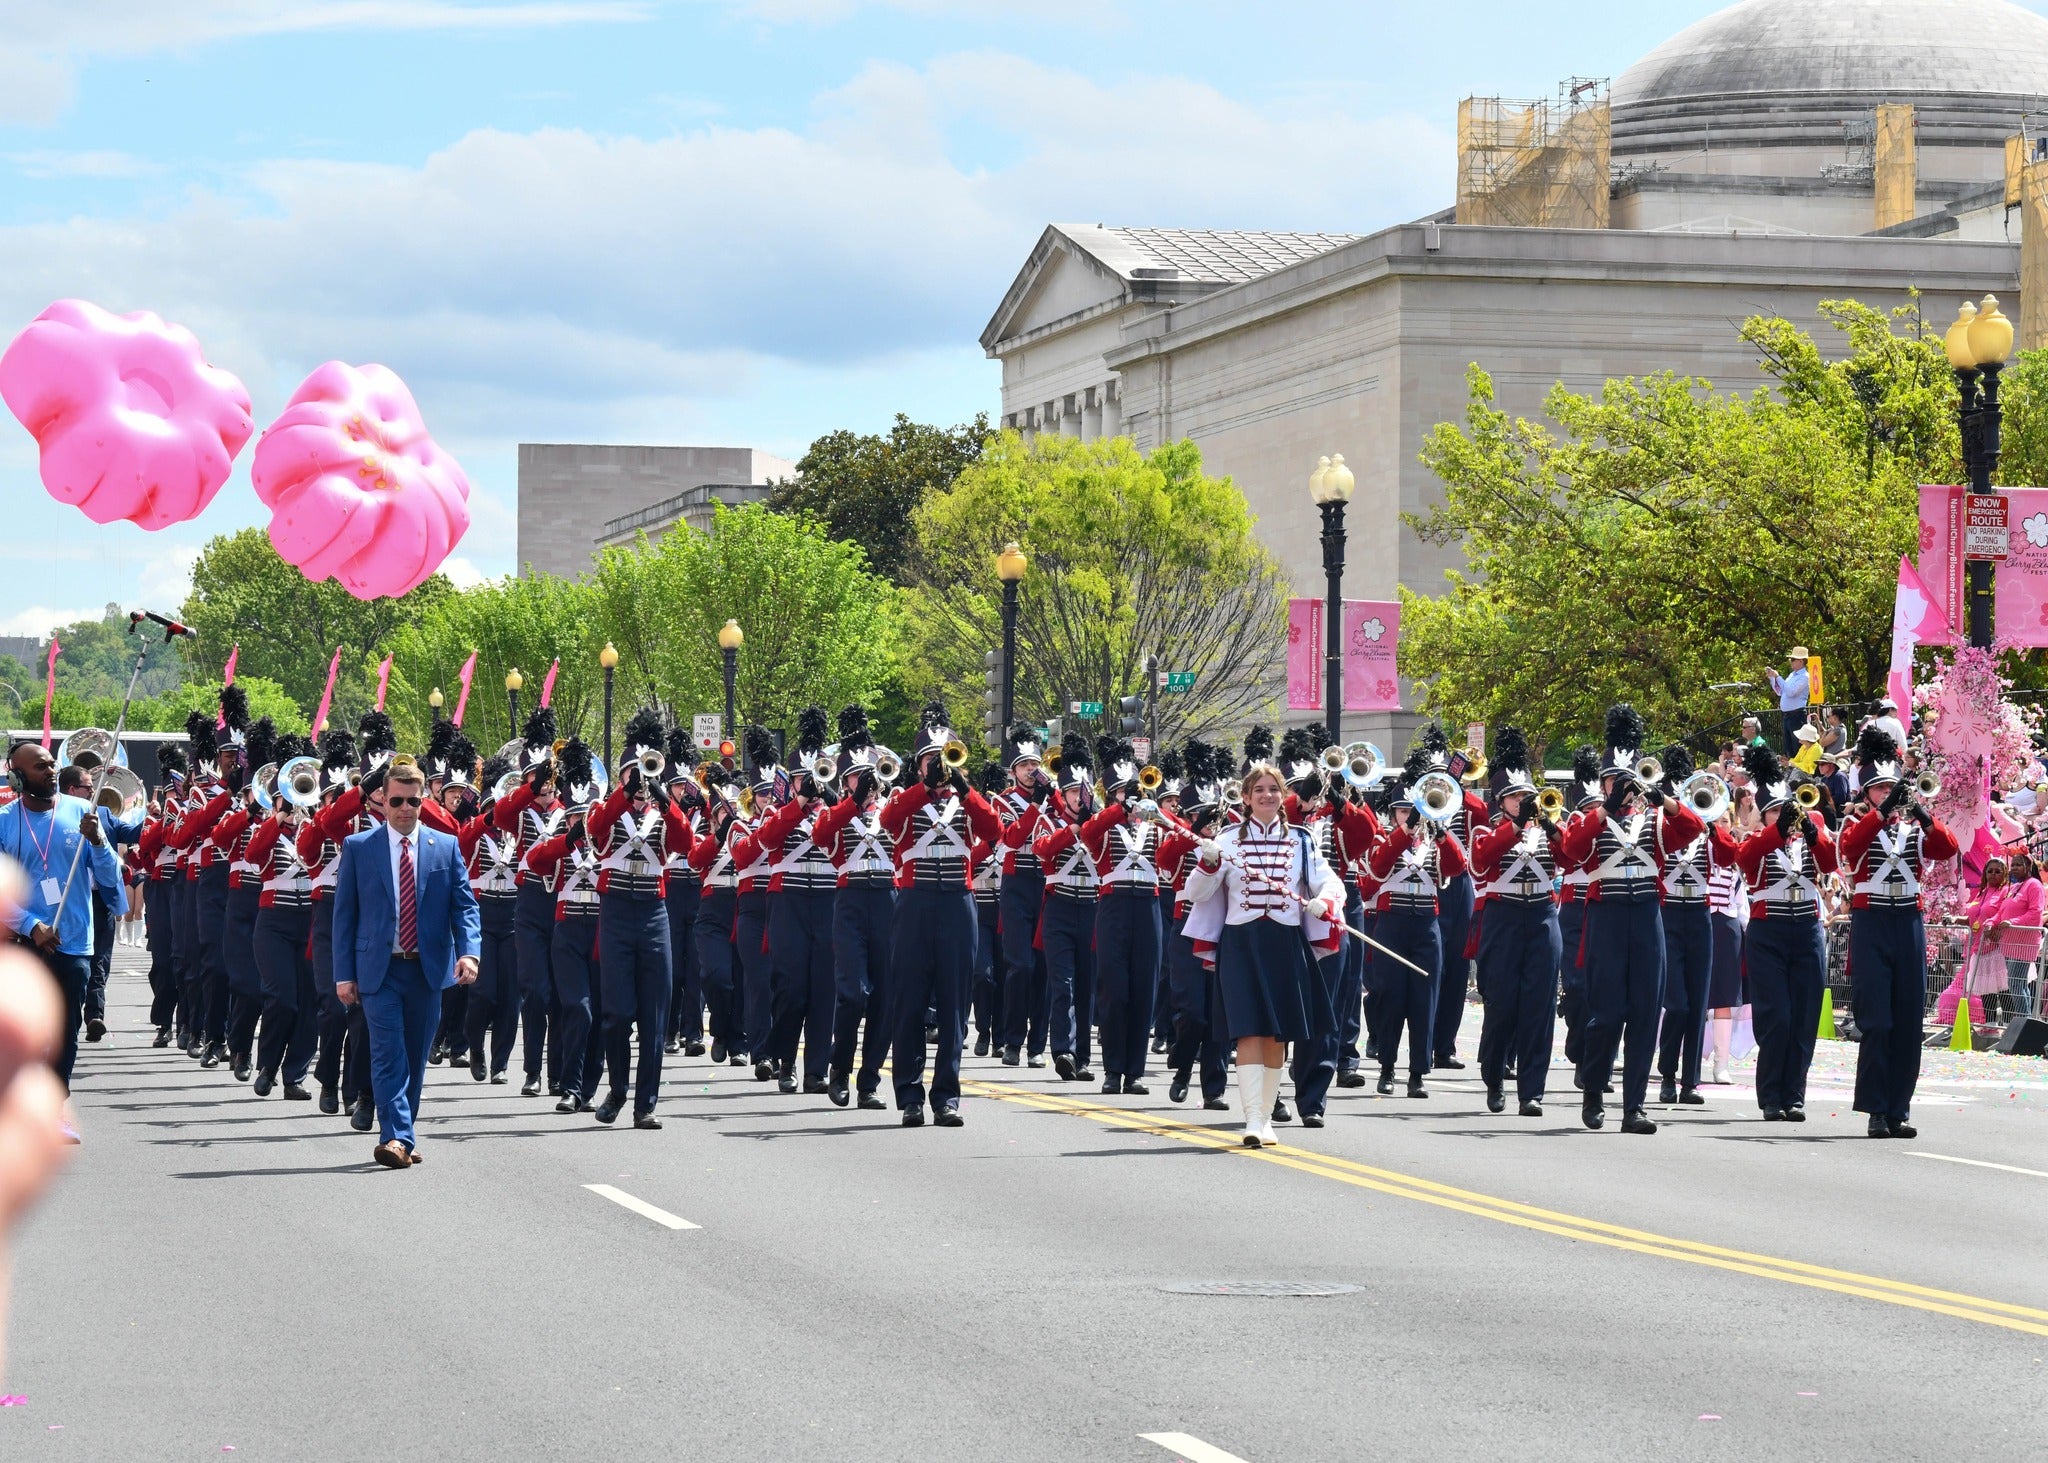 High School marching band at National Cherry Blossom Festival